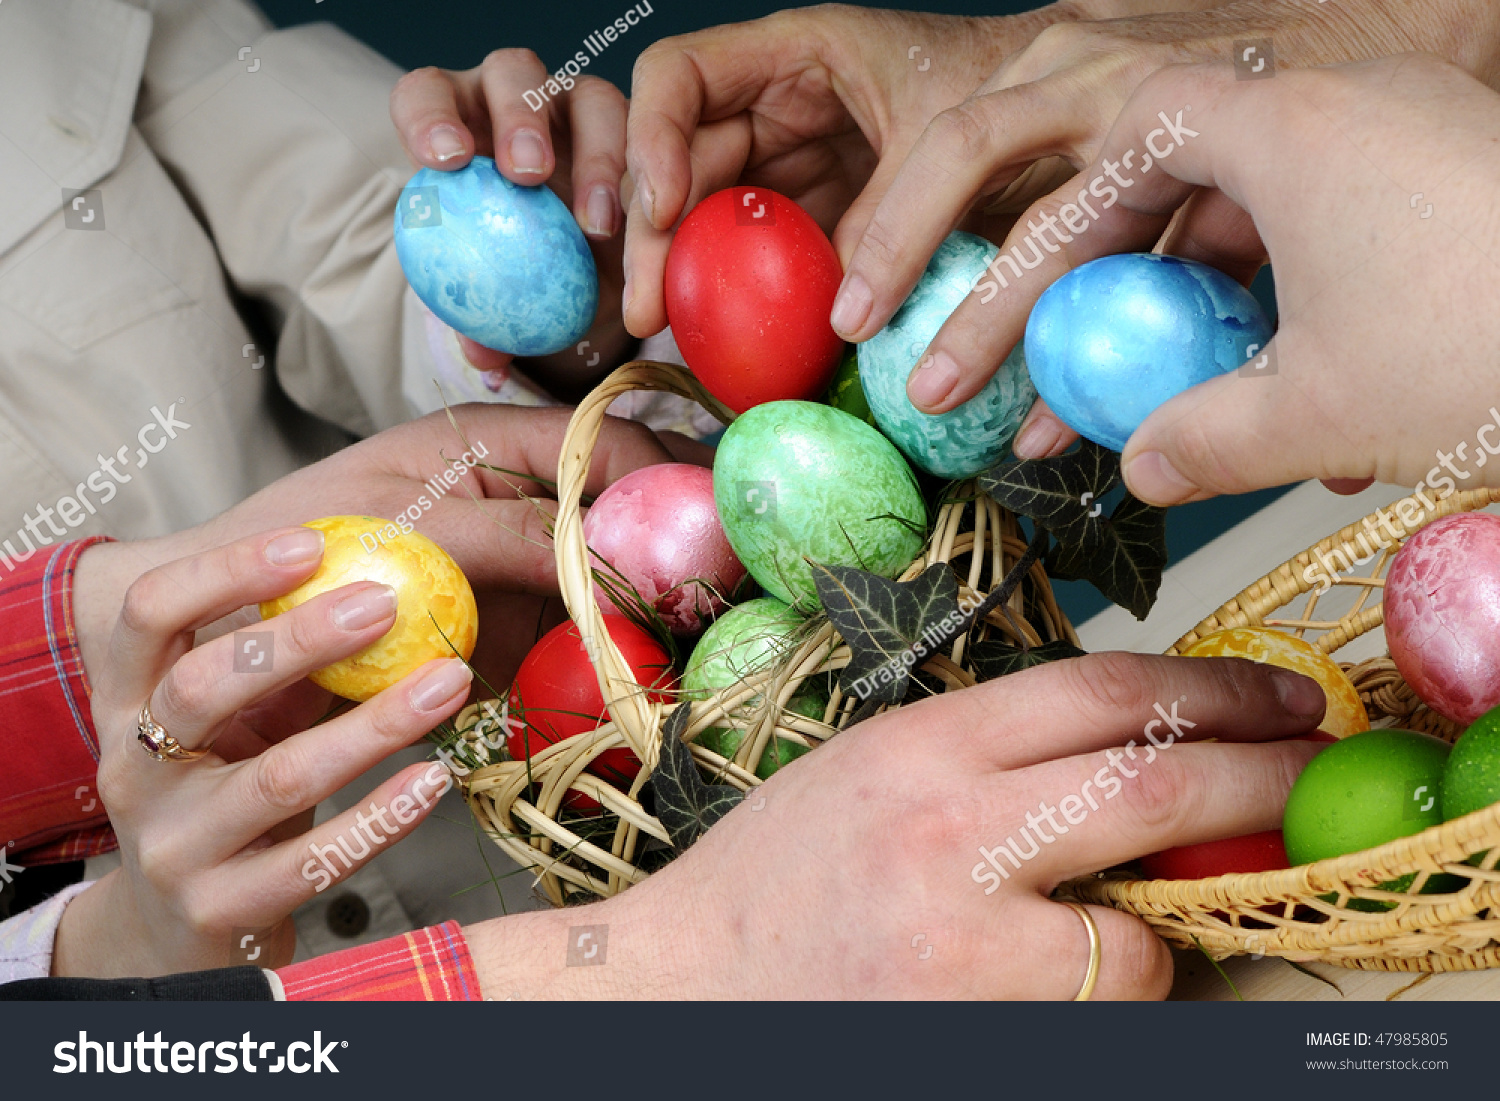 Group Of People Celebrating Easter Holiday Stock Photo 47985805